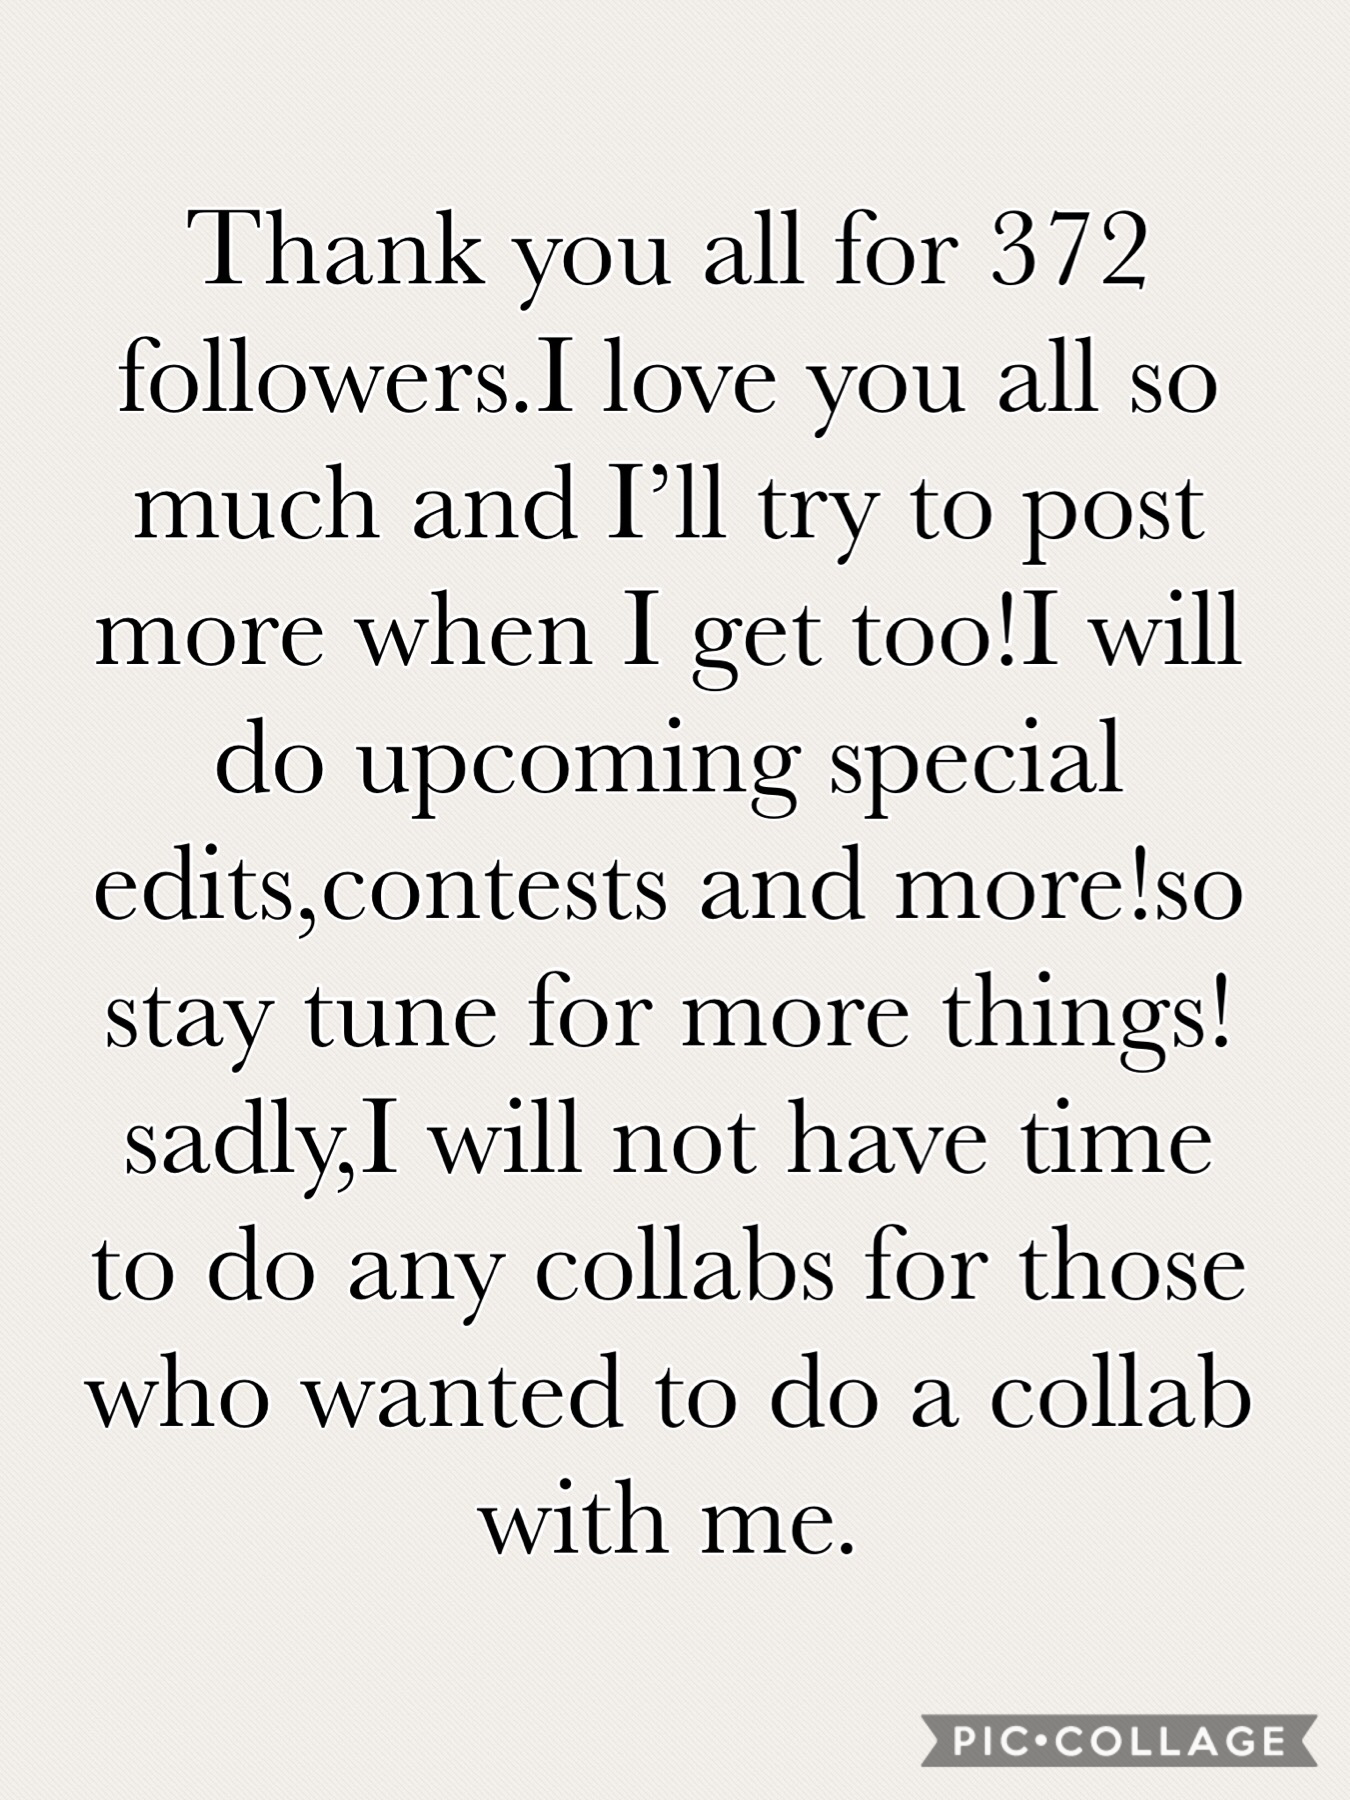 Thank you all so much and stay tune for contests,edits and even more!